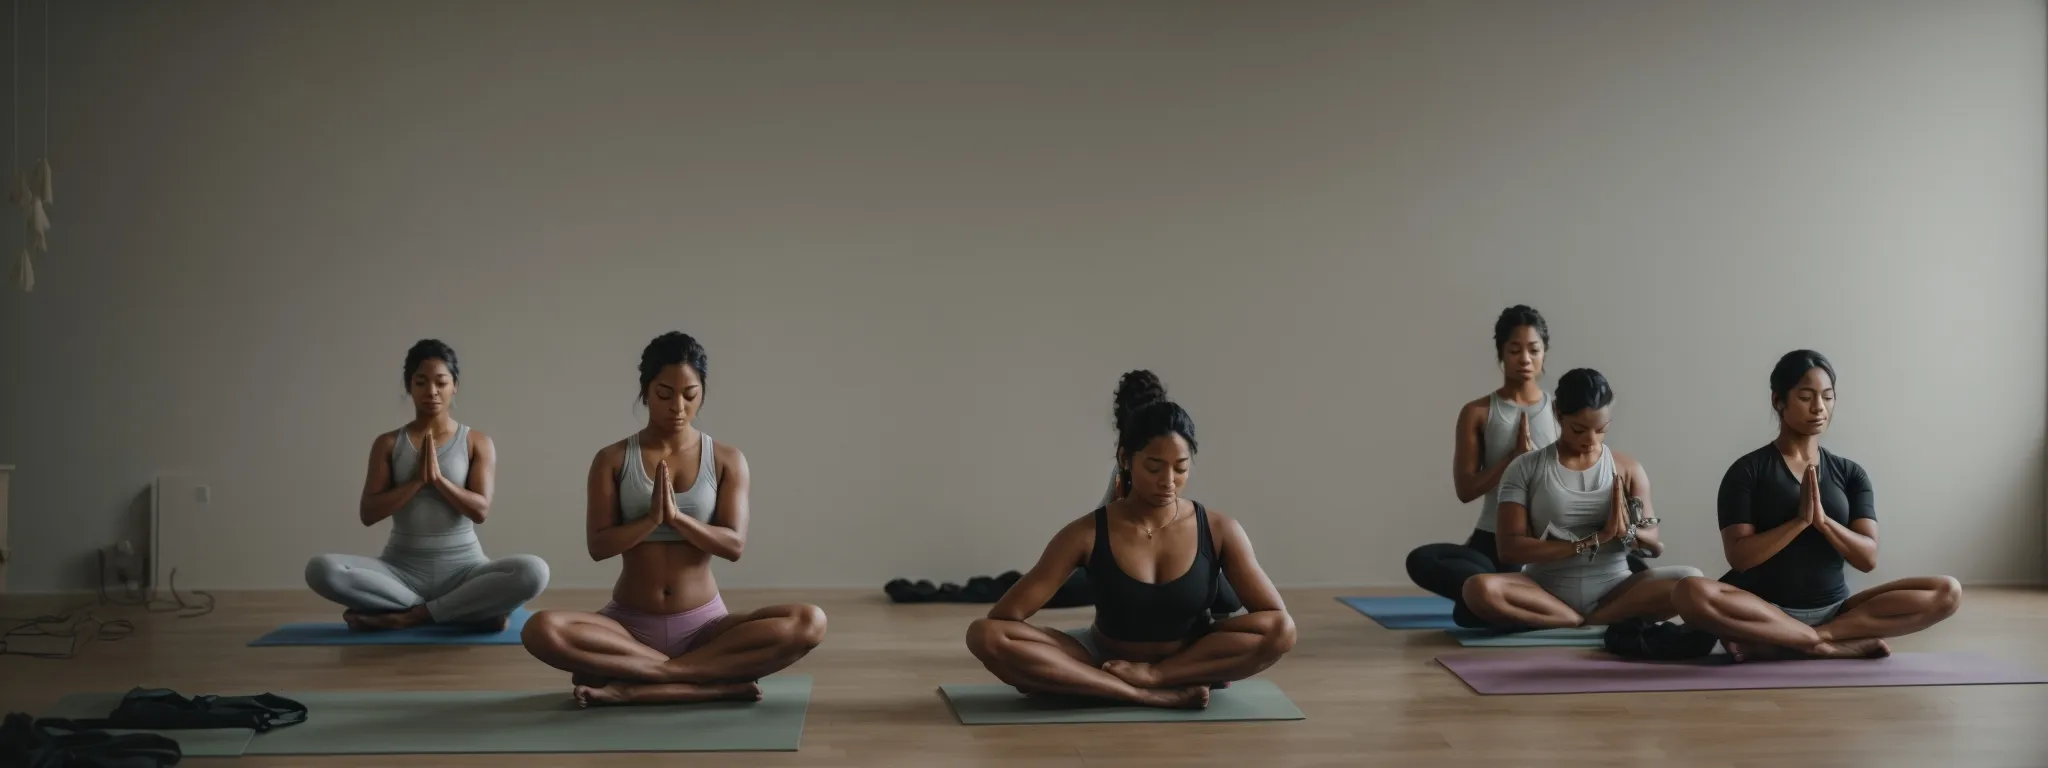 a group of individuals practicing yoga poses in a tranquil studio while a smartphone displays their online social media profile in the foreground.